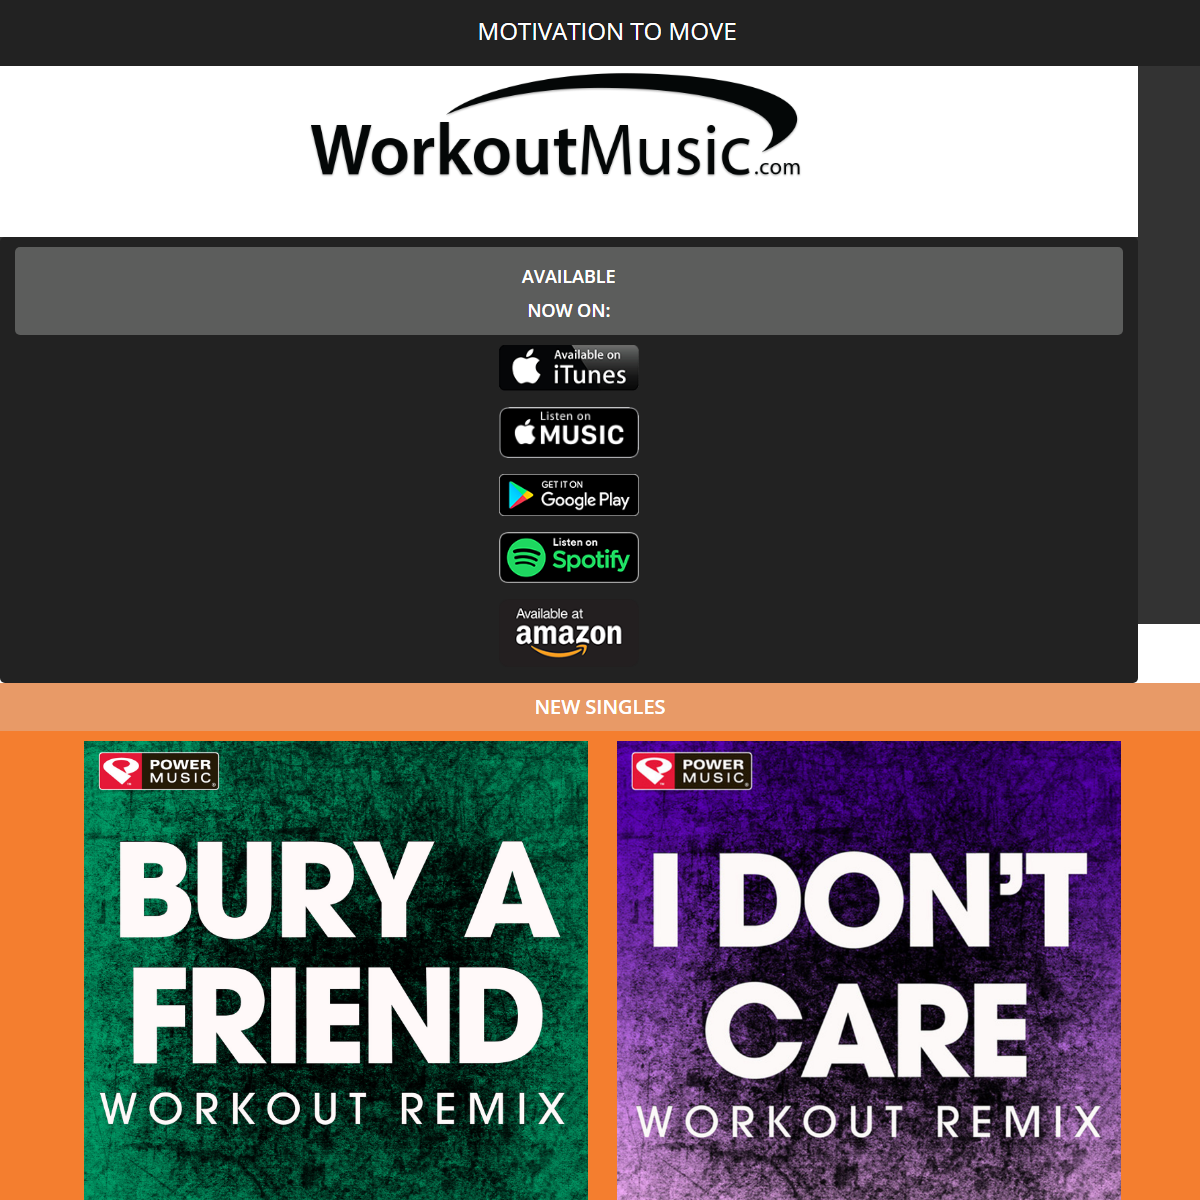 A complete backup of http://www.workoutmusic.com/